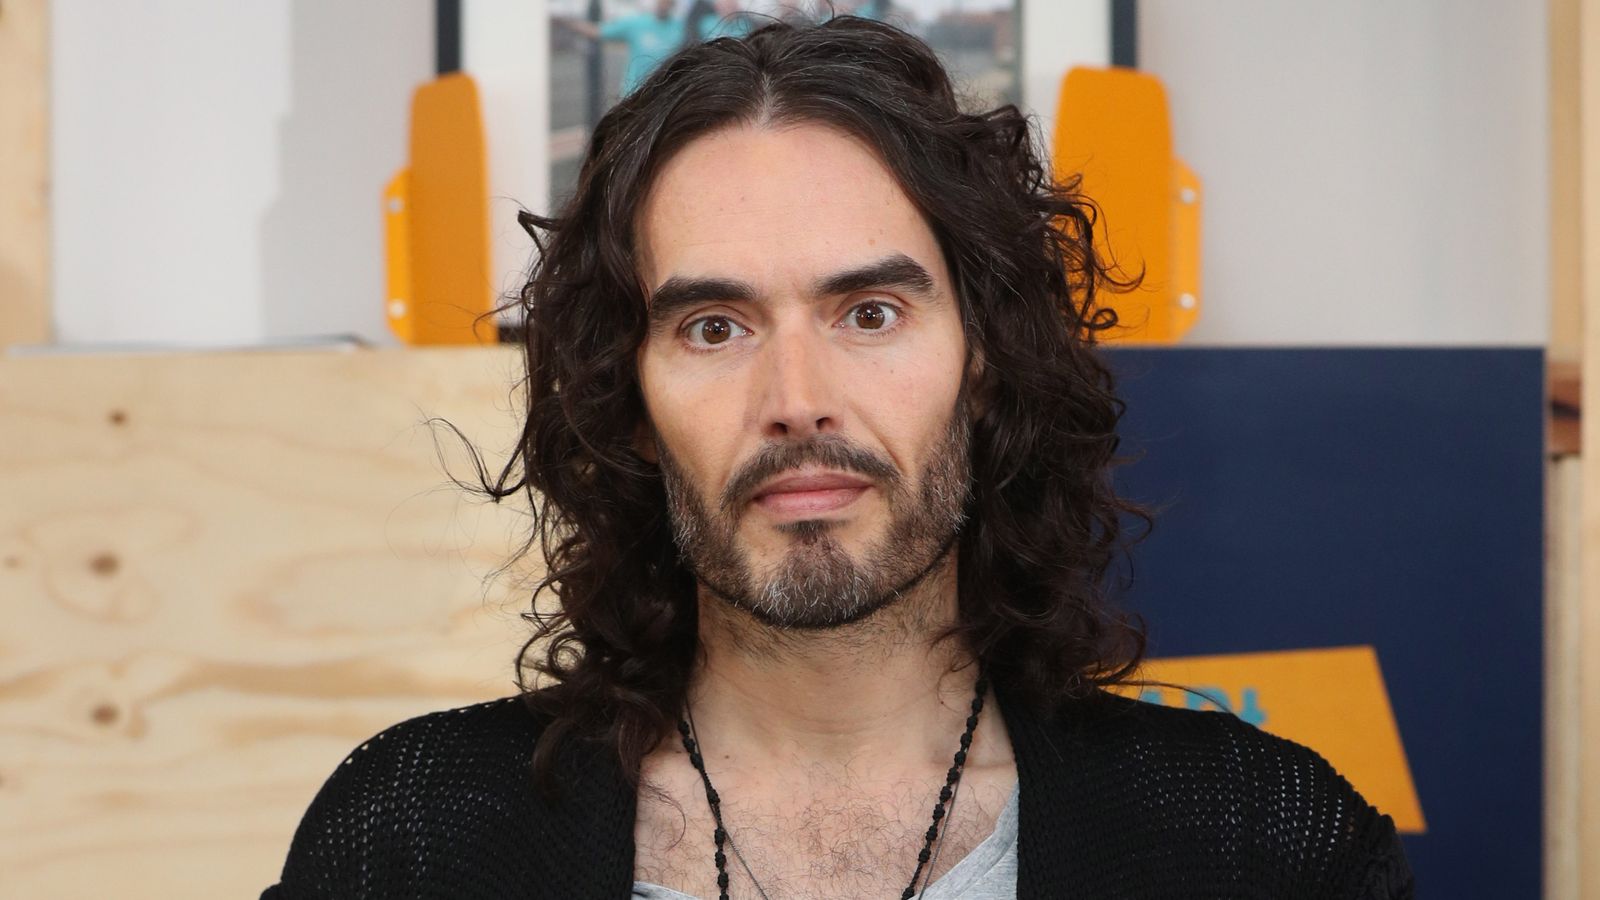 Russell Brand: Metropolitan Police investigating sexual offence claims in London and elsewhere